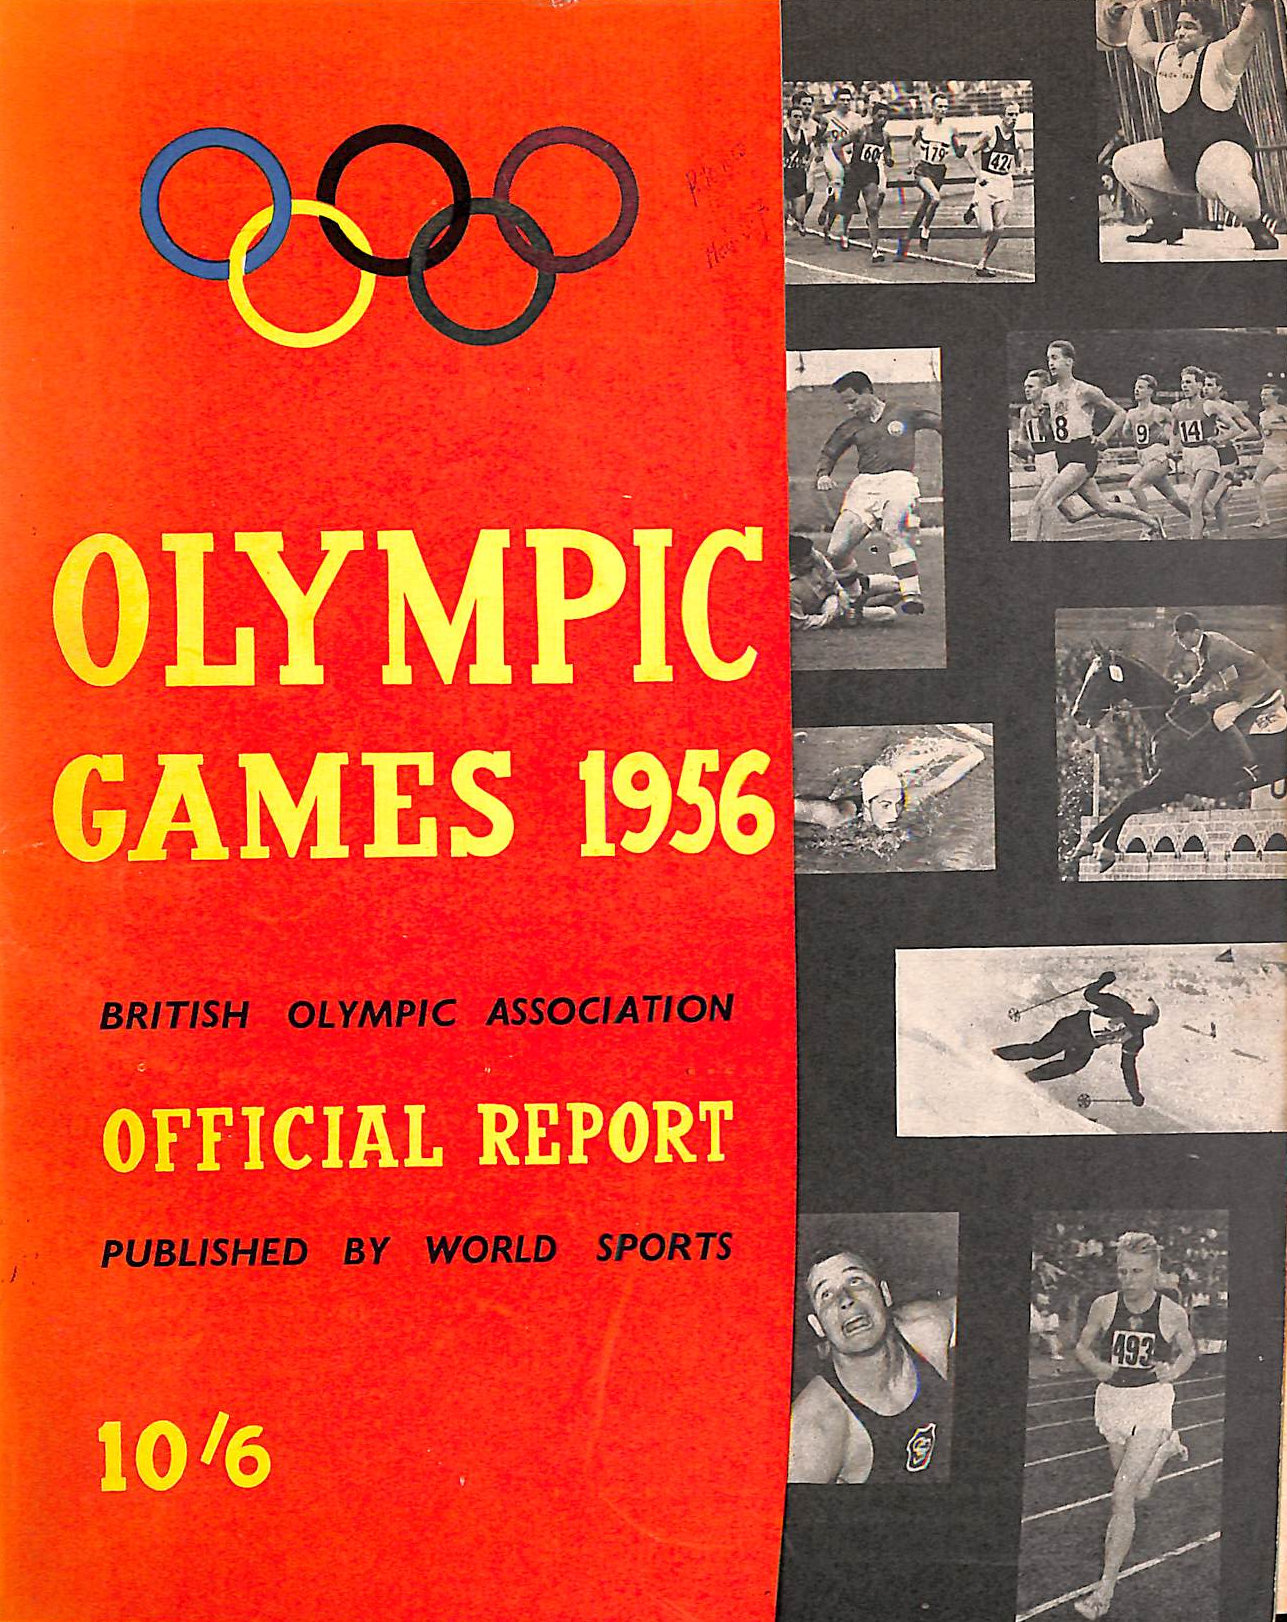 BRITISH OLYMPIC ASSOCIATION - British Olympic Association Official Report of the Olympic Games - XVIth Olympiad - Melbourne, November 22 - December 3, 1956